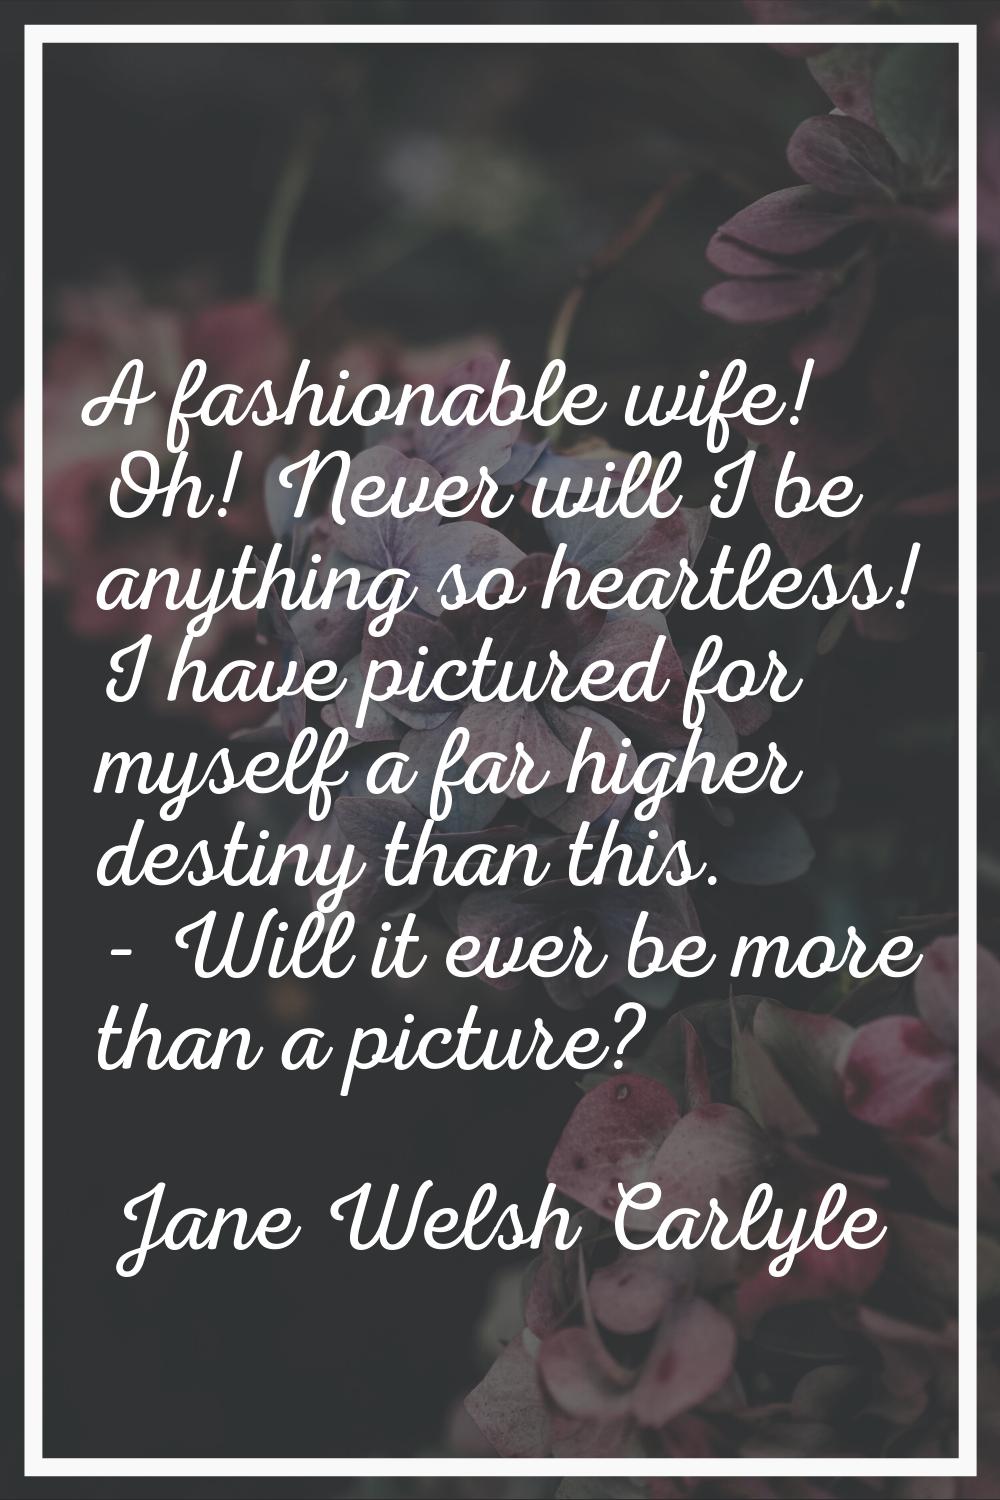 A fashionable wife! Oh! Never will I be anything so heartless! I have pictured for myself a far hig